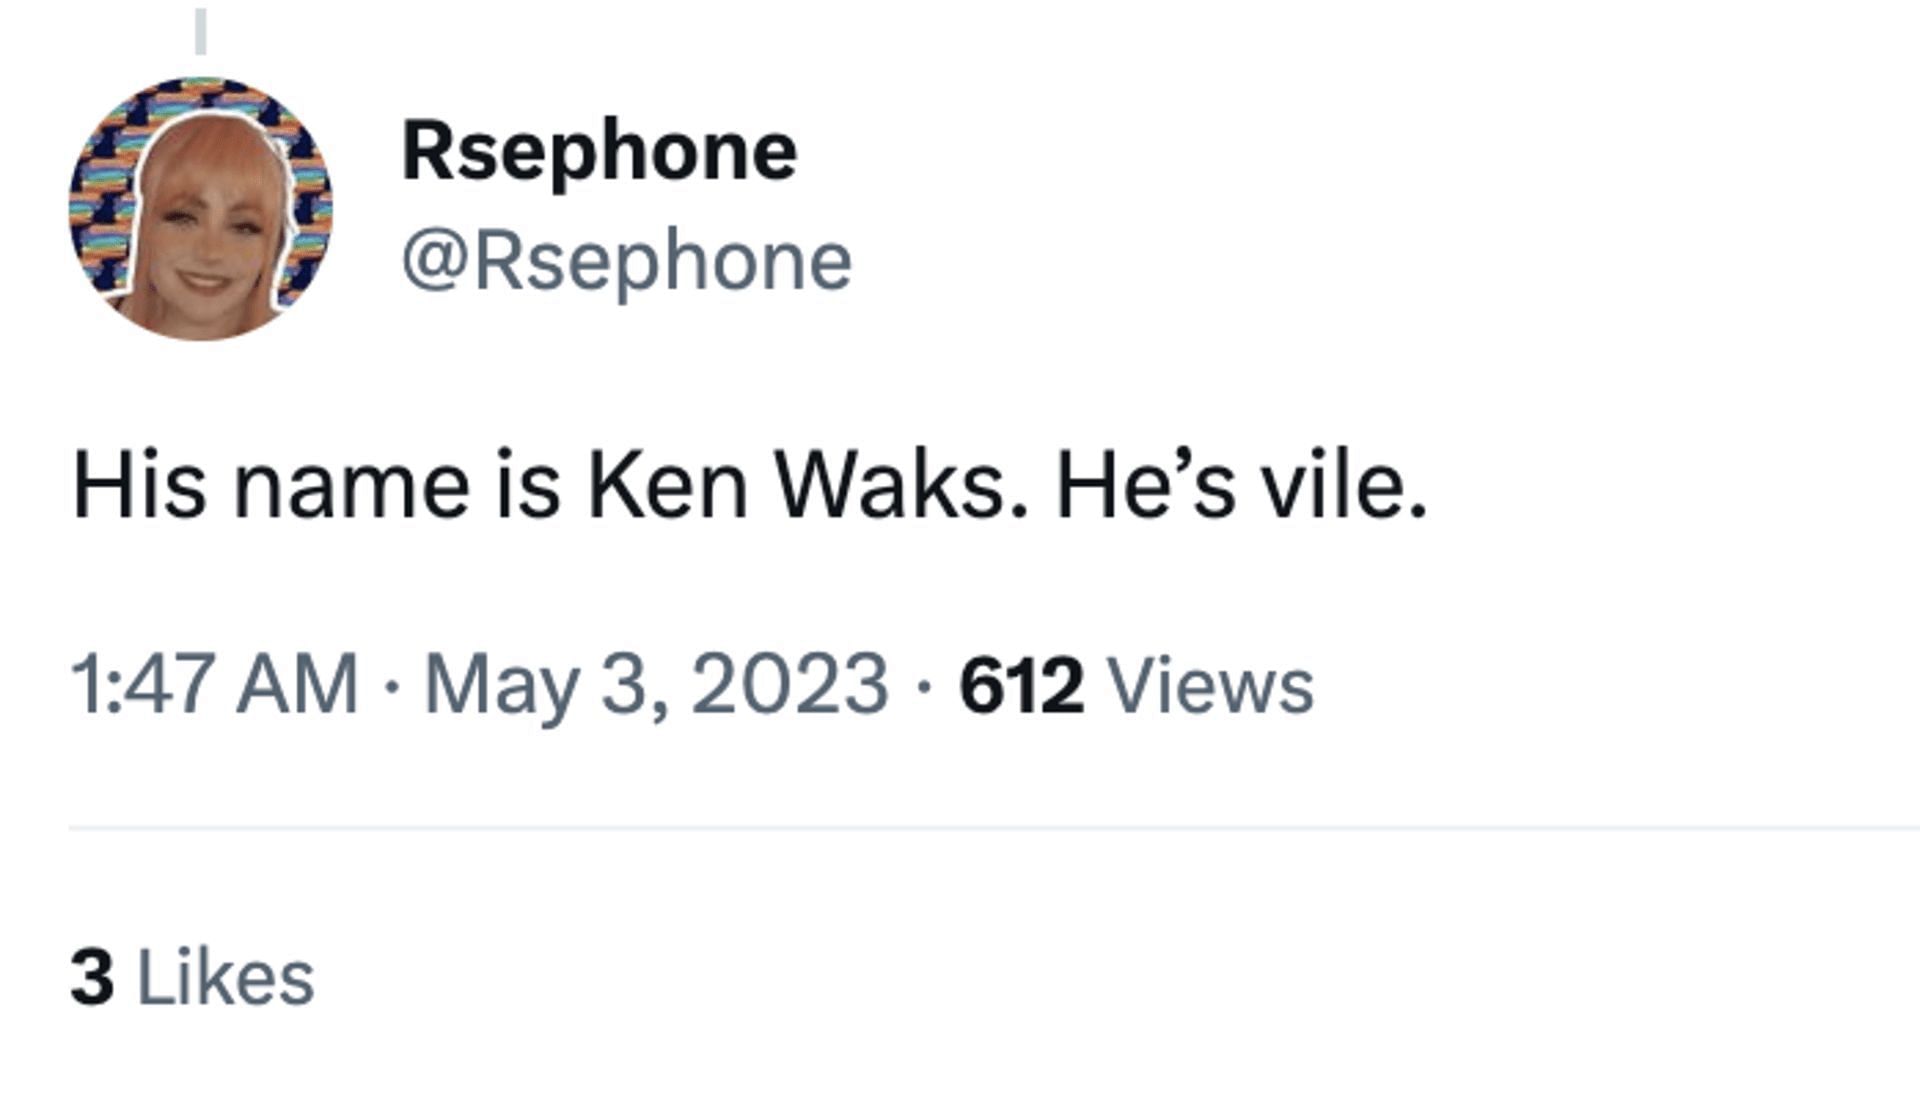 Social media users bash Ken Waks as many alleged that the TikToker created an imaginary scenario only to promote his app. (Image via Twitter)